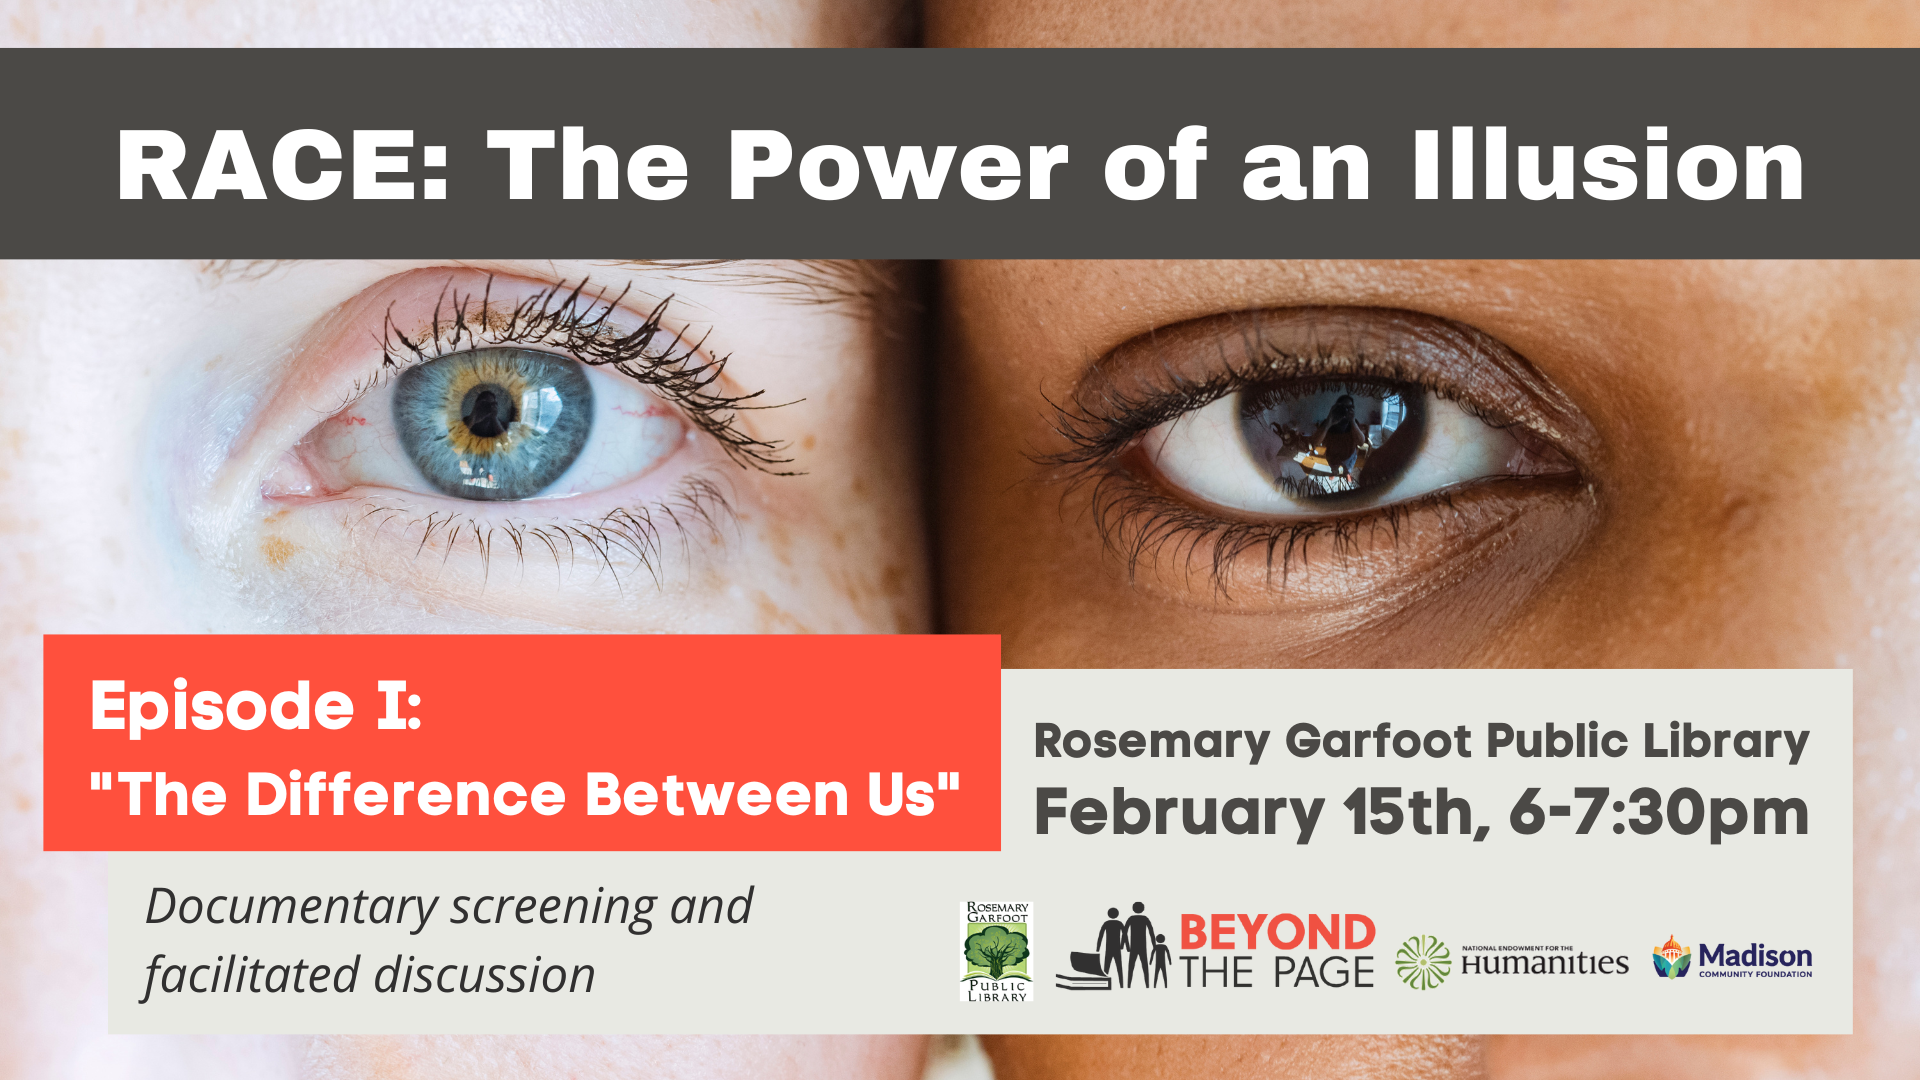 Race: The Power of an Illusion. Background image: Close up photo of two faces cheek to cheek, one very light skinned with blue eye the other brown skinned with dark brown eye. Episode I "The difference between us" Documentary screening and facilitated discussion. Rosemary Garfoot Public Library. February 15th, 6-7:30pm. (Logos: Rosemary Garfoot Public Library, Beyond the Page, National Endowment for the Humanities and Madison Community Foundation)